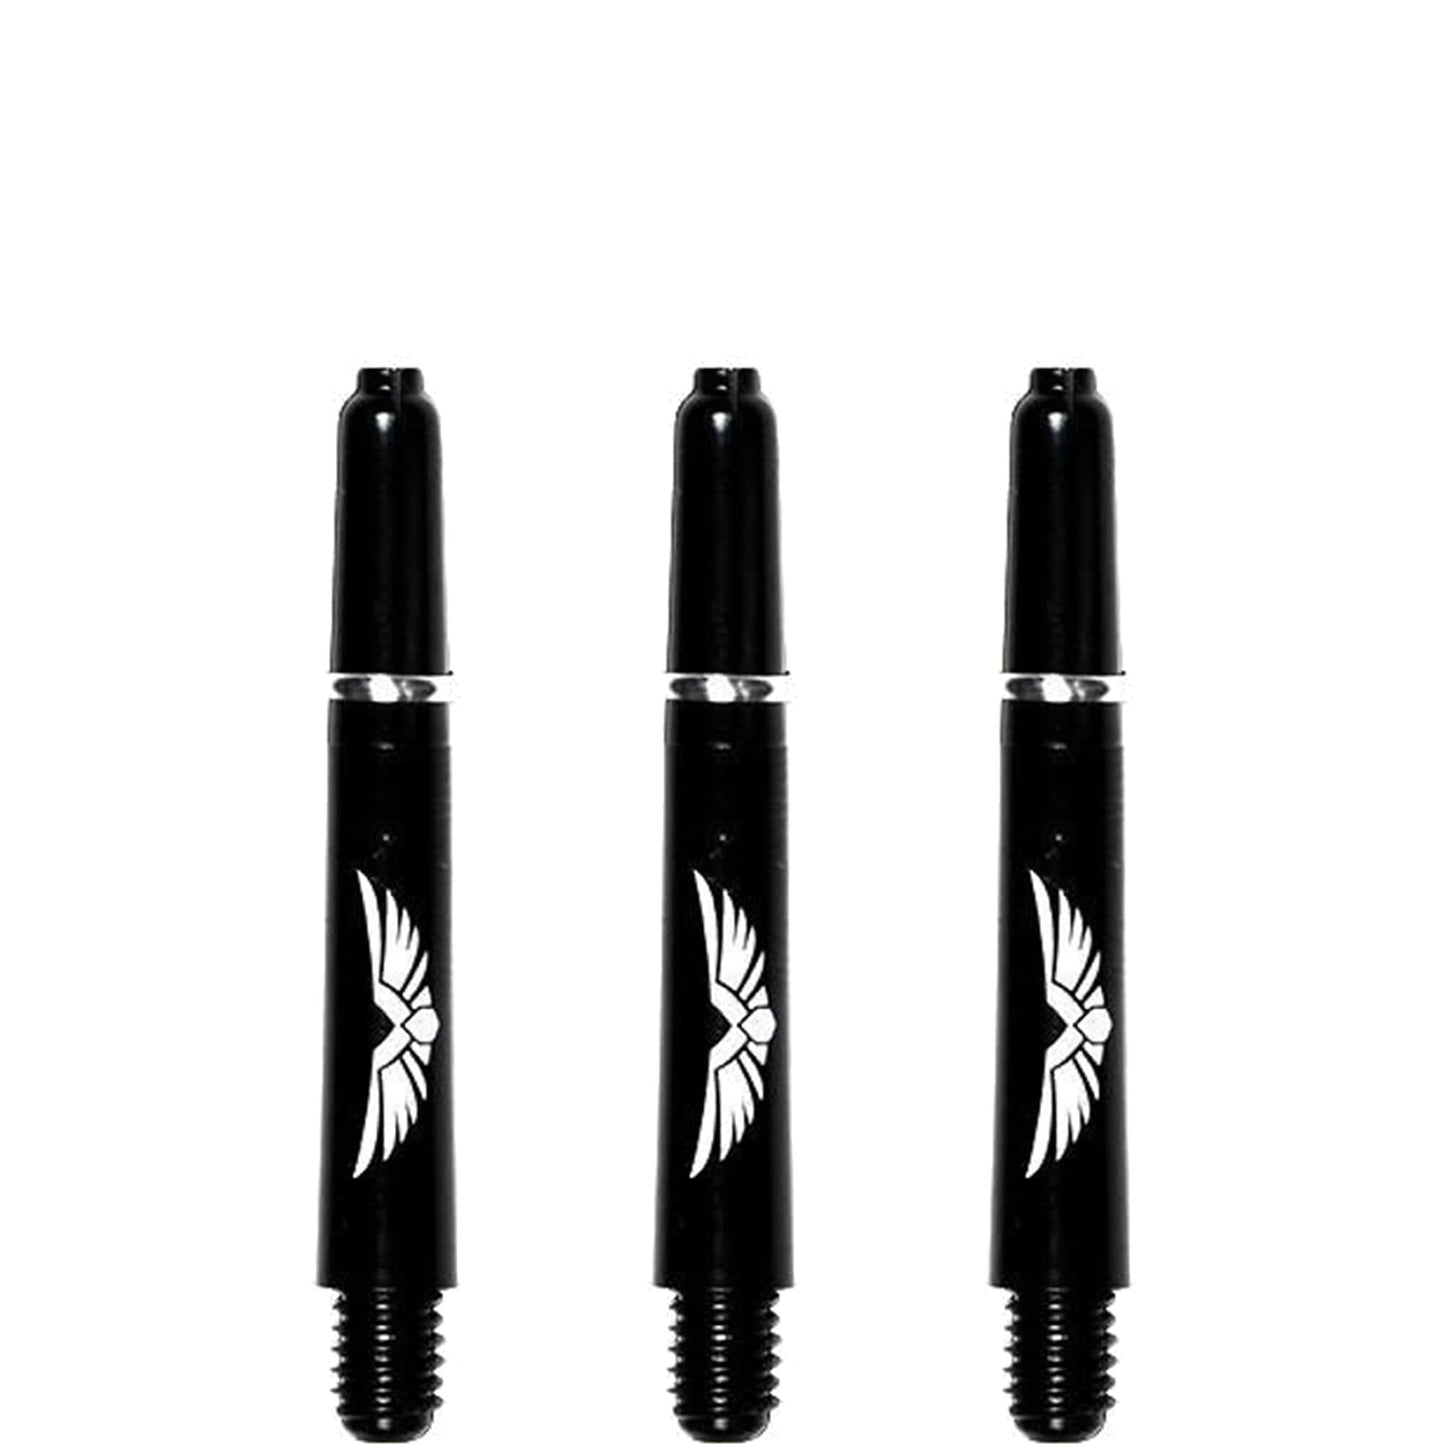 Shot Eagle Claw Dart Shafts - with Machined Rings - Strong Polycarbonate Stems - Black Short